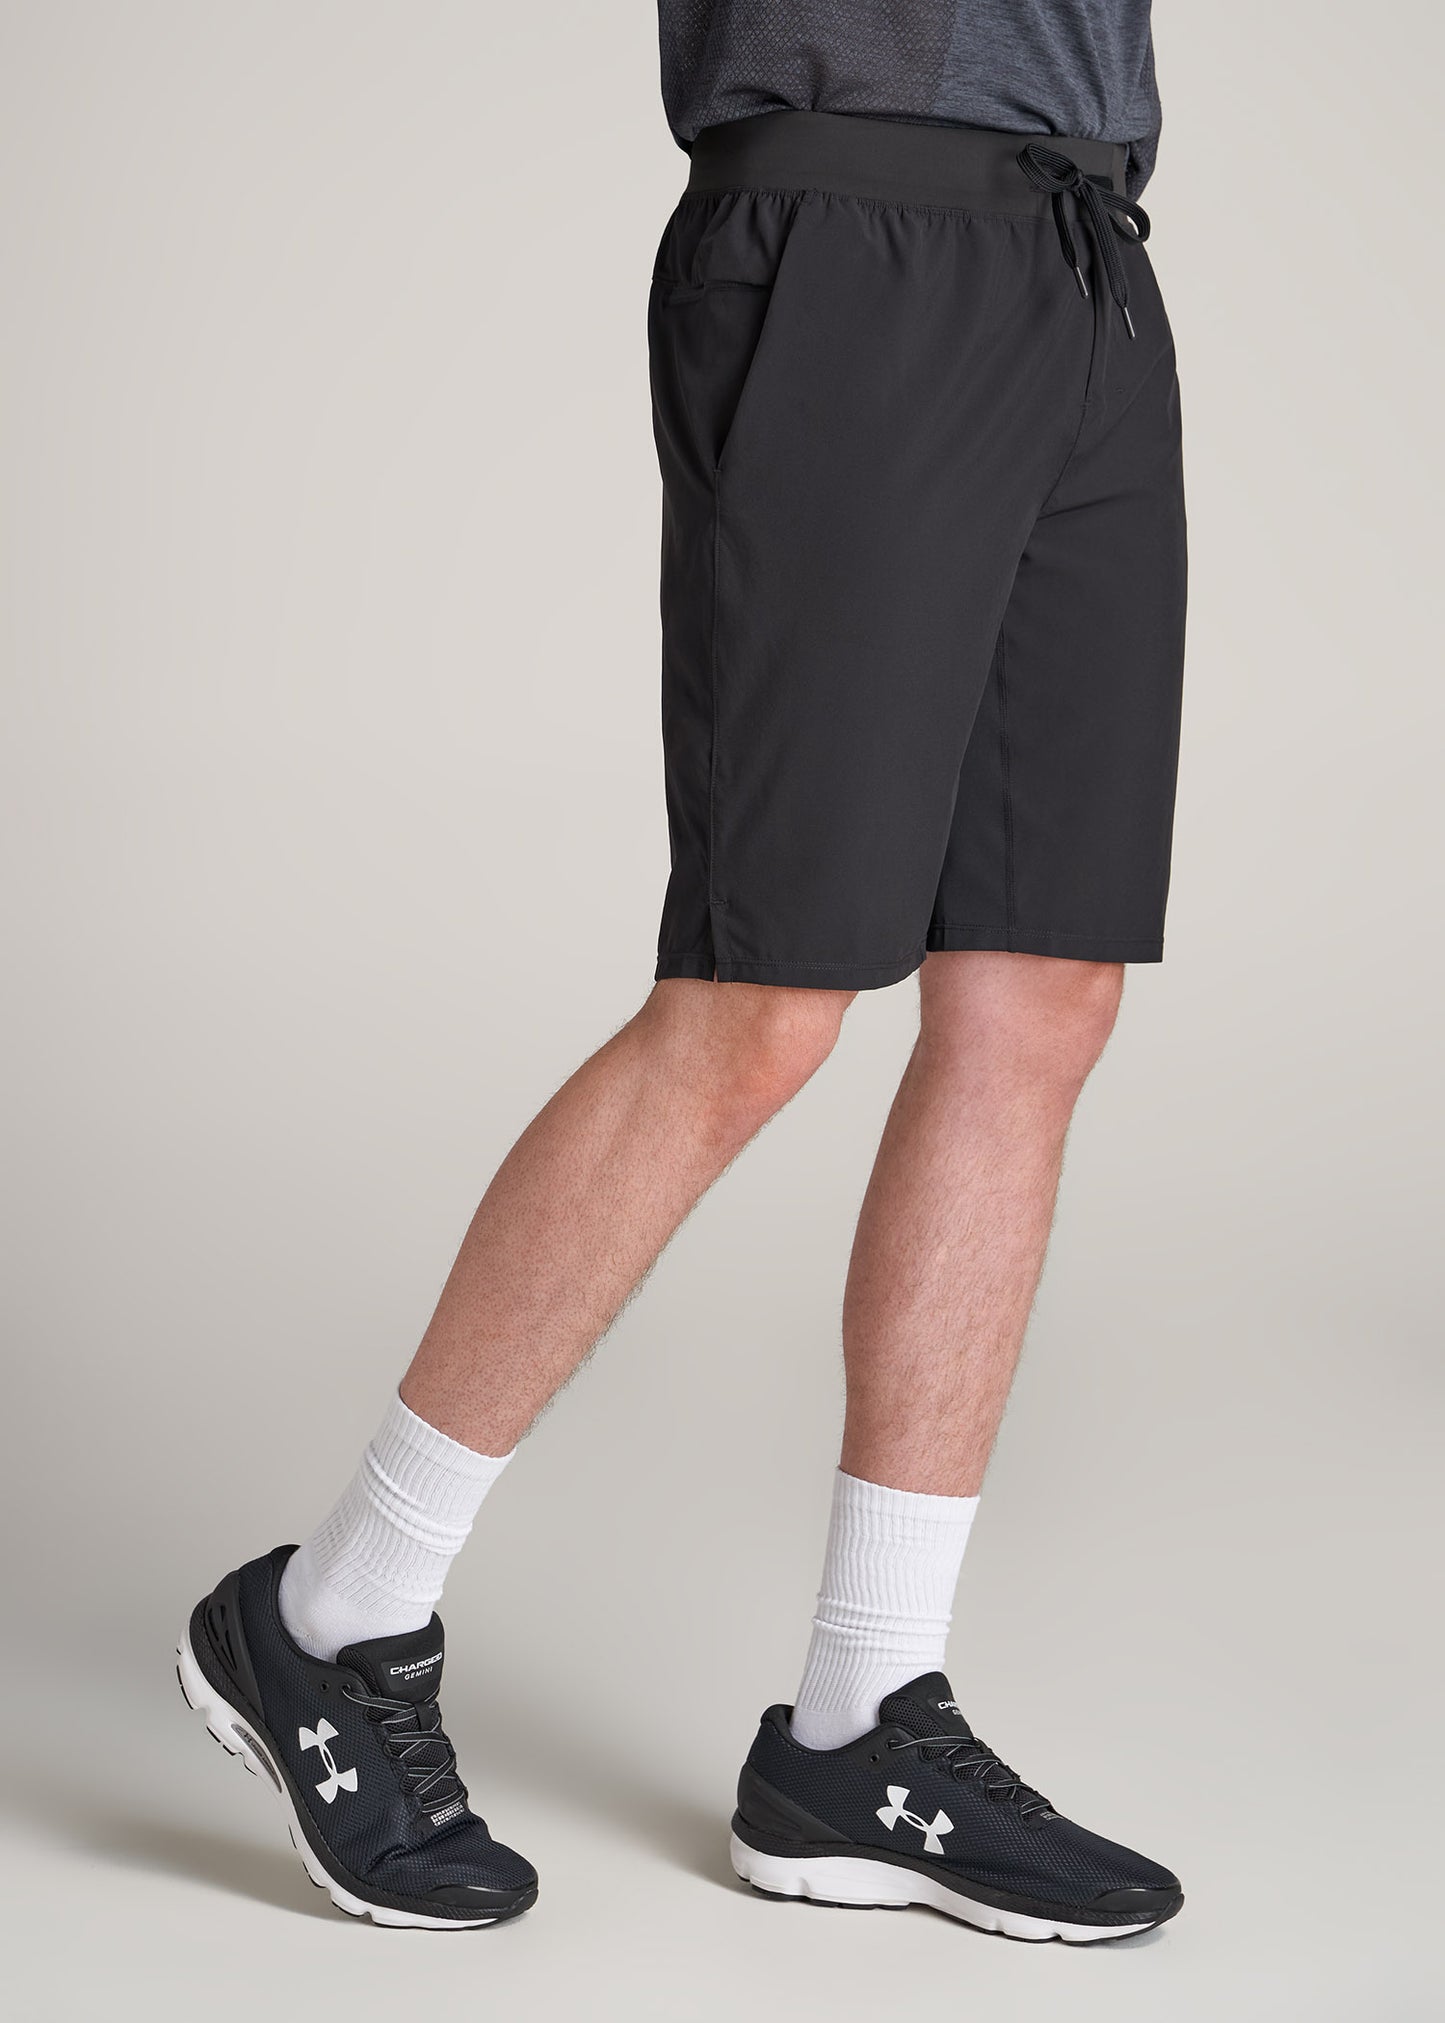    American-Tall-Men-Performance-Stretch-Woven-Shorts-Black-side